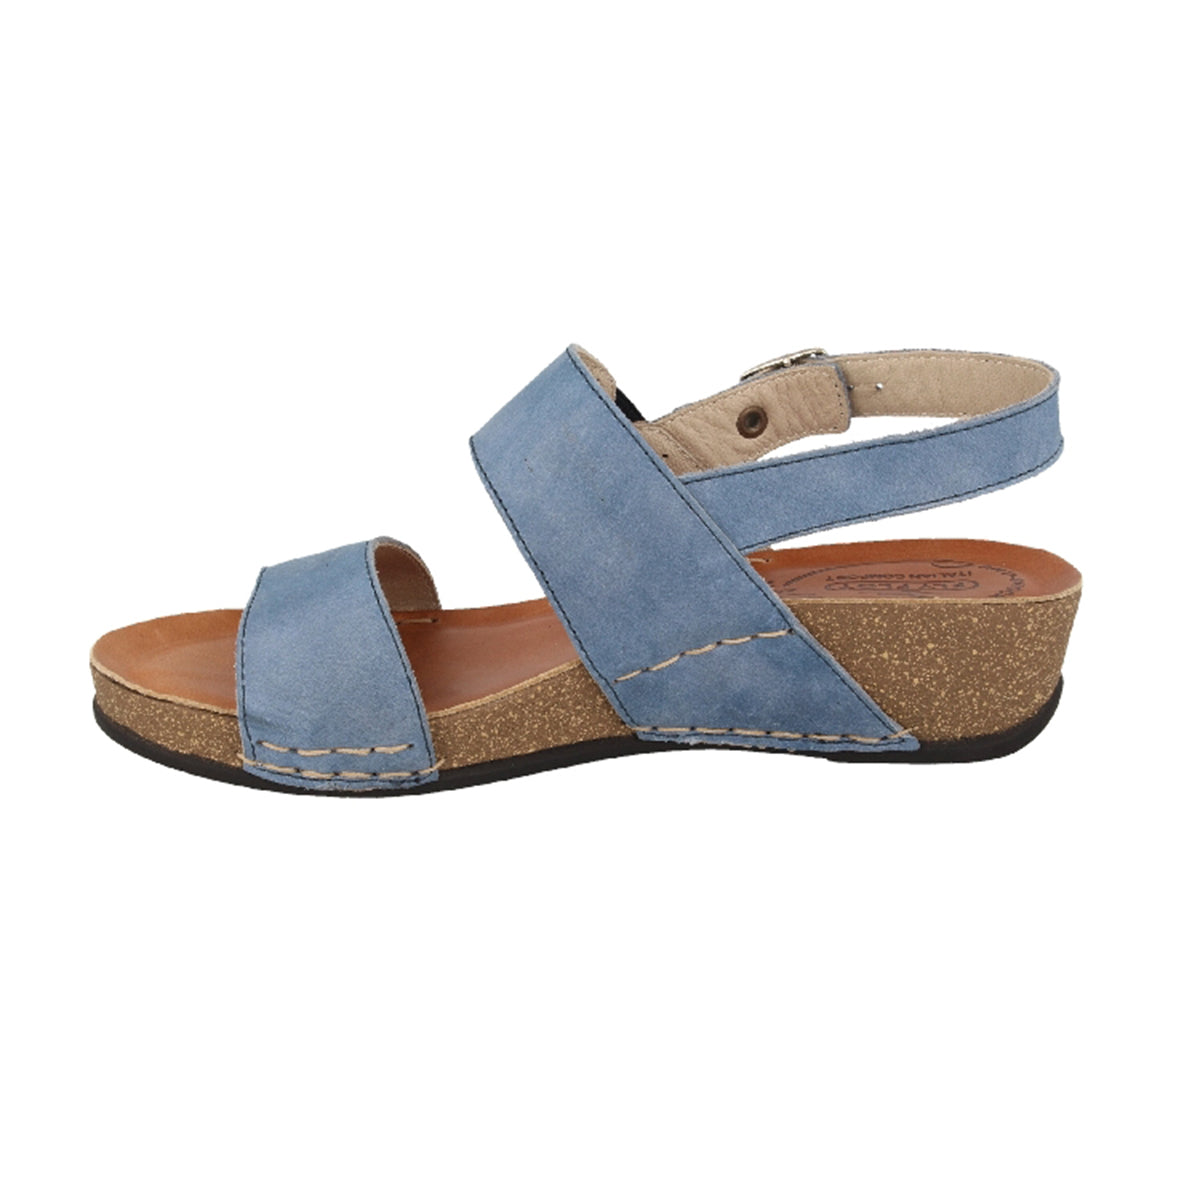 See the Pale Turquiose Leather Adjustable Buckle Back Strap Women Sandals With Anti-Shock Cushioned Leather Insole in the colour PALE TURQUOISE, available in various sizes